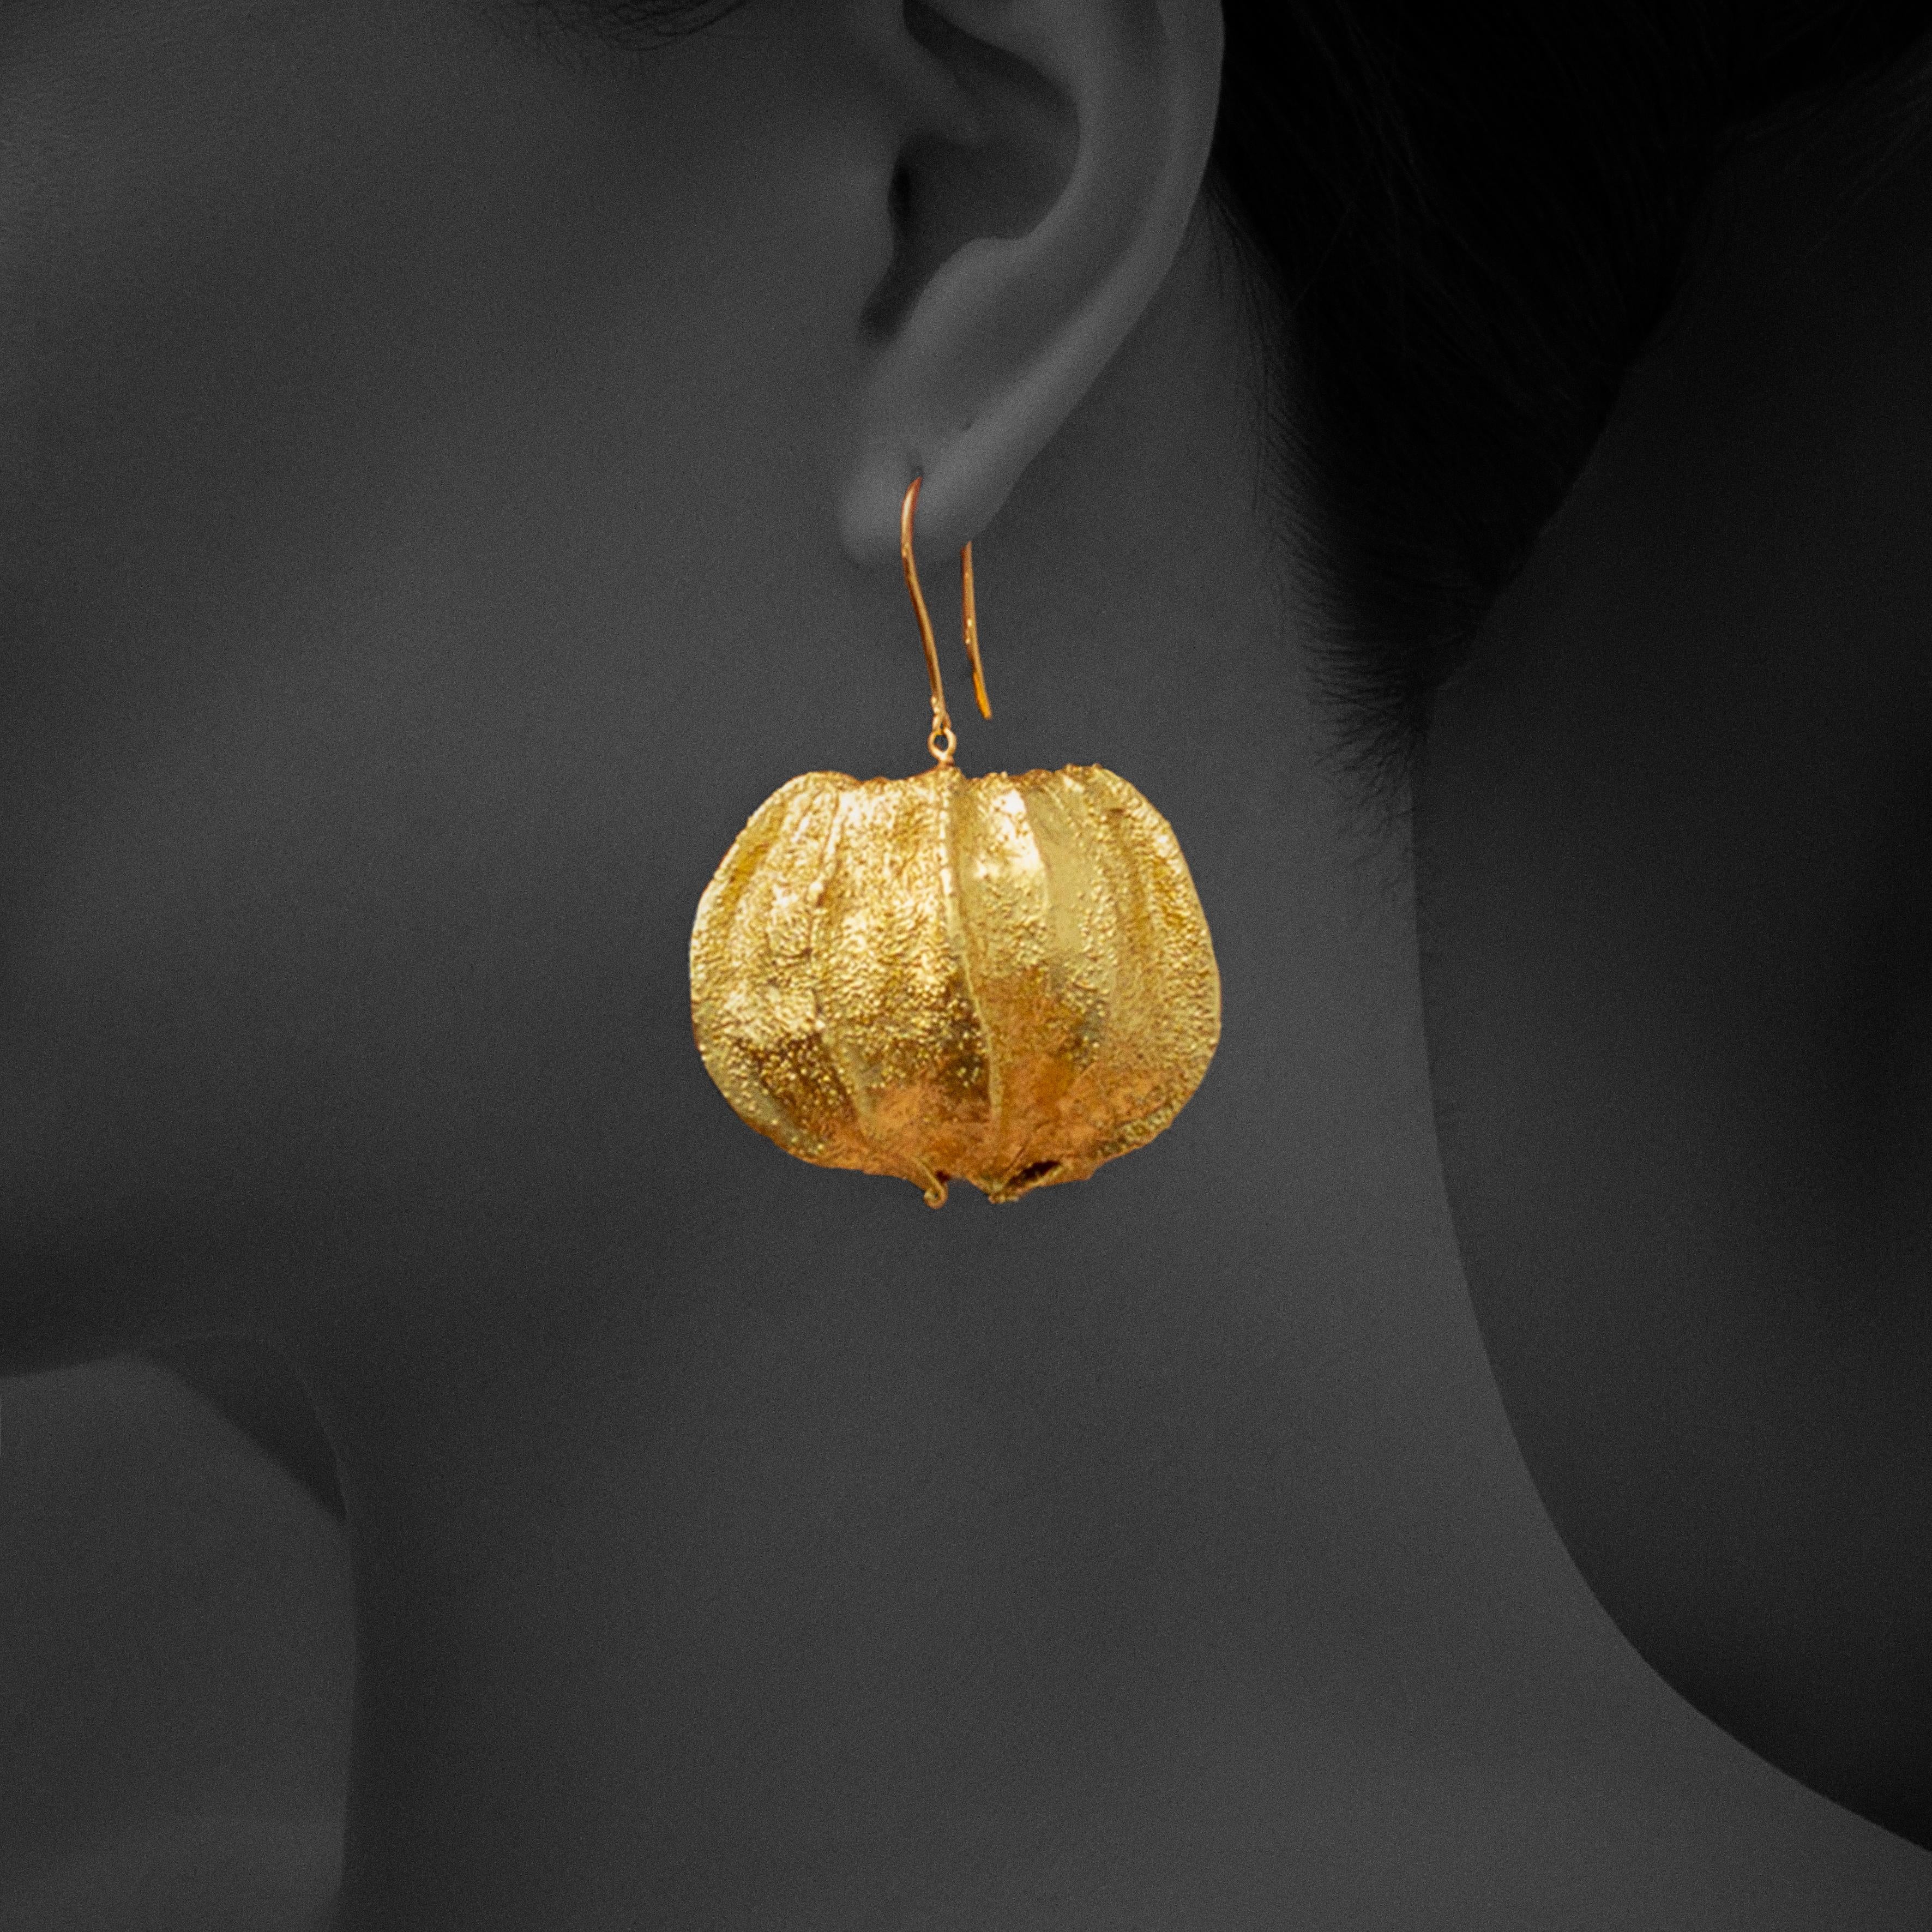 We use the cover of the goose berry and covers it with 24k pure gold paper to design these beautiful & light weight earrings.

The hooks are 9K gold.

PRODUCT CARE
Being made of natural materials, this product requires a good care in usage. 

Note :